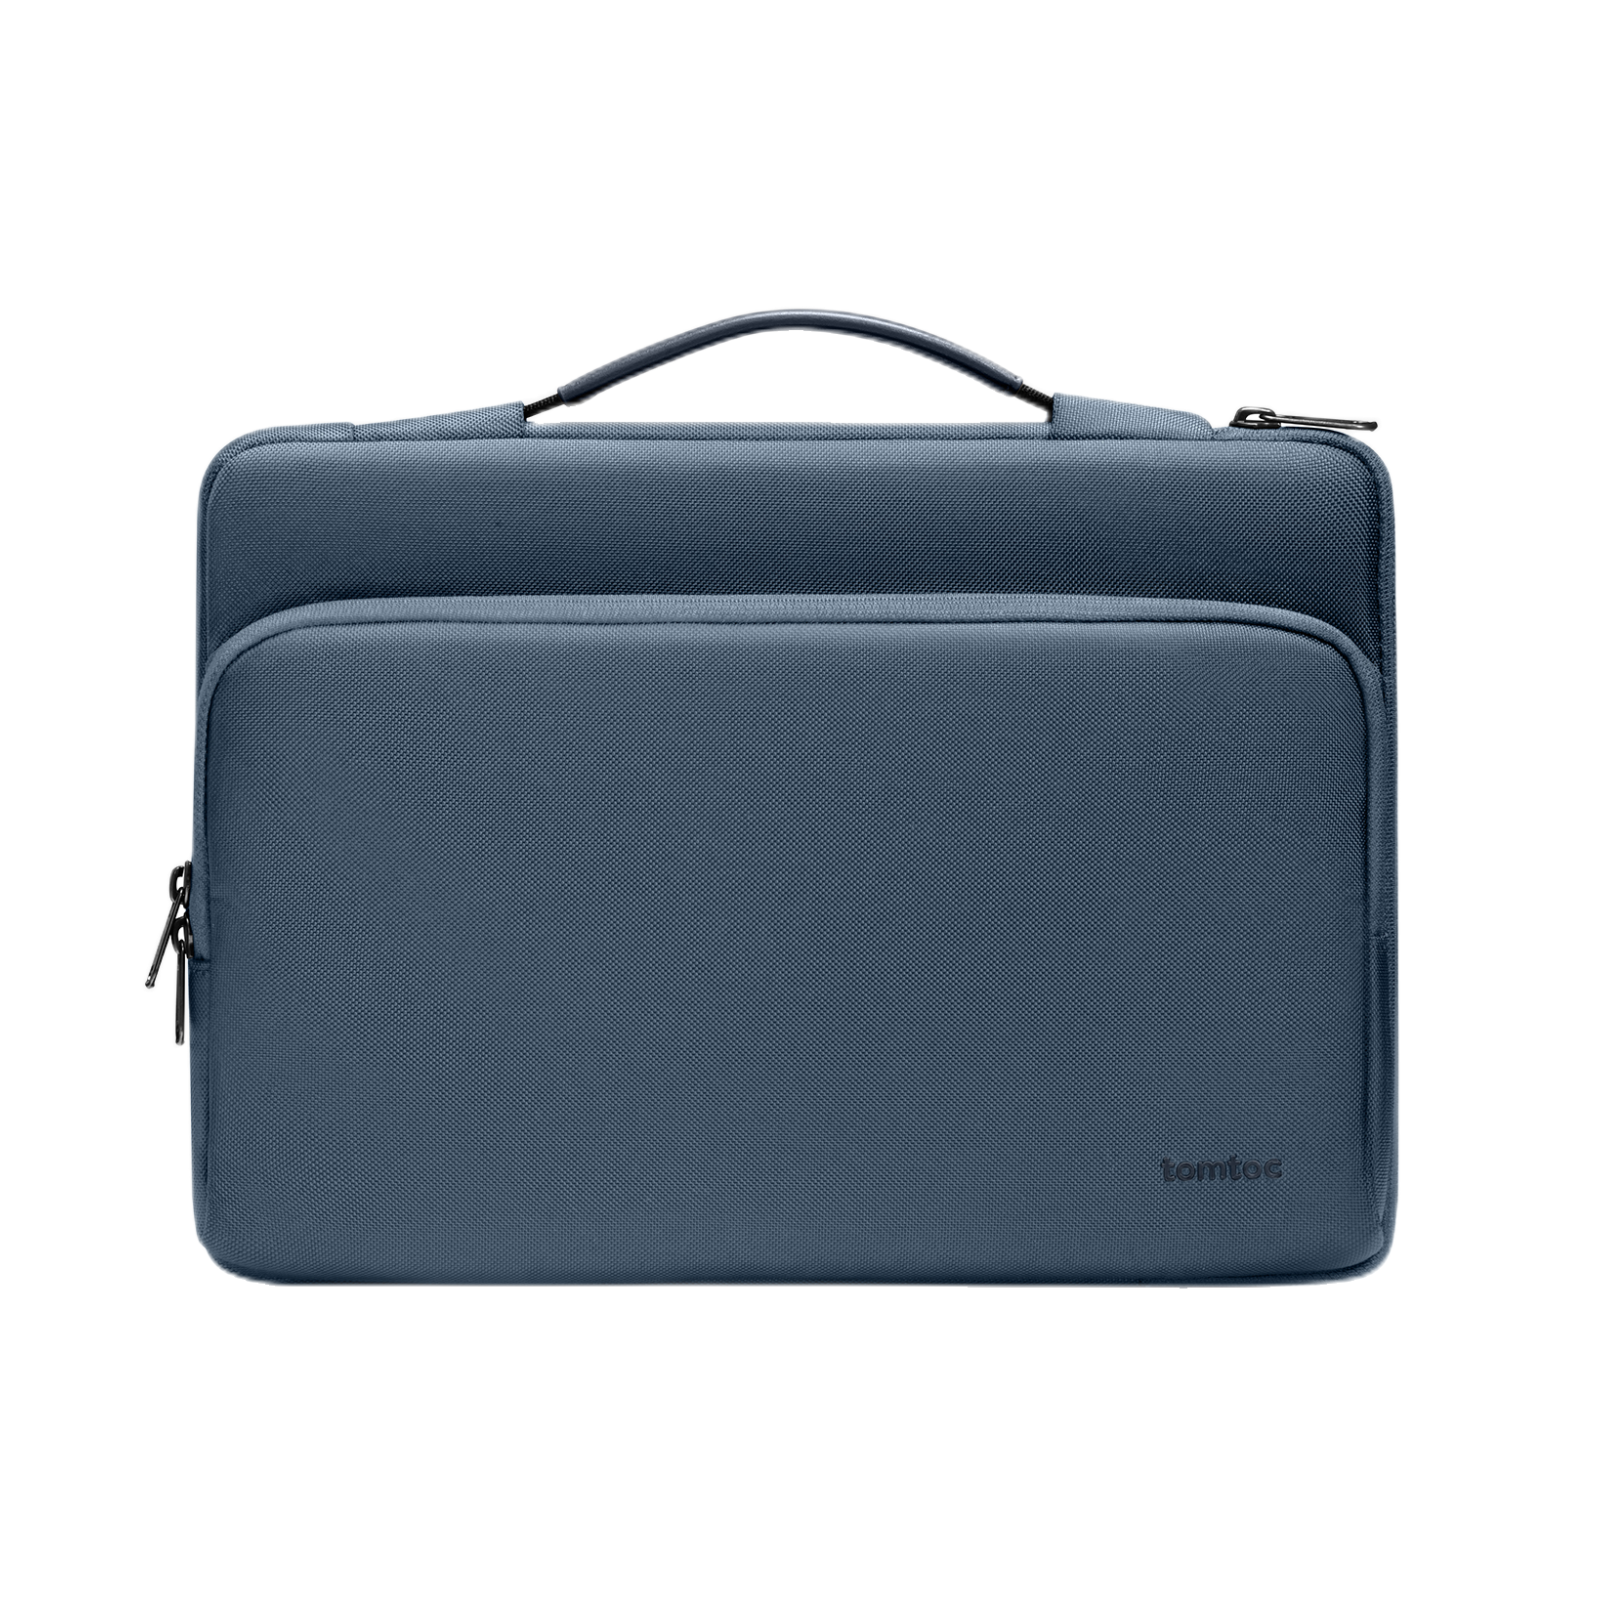 Defender-A14 Laptop Briefcase For 13-inch MacBook Pro & Air